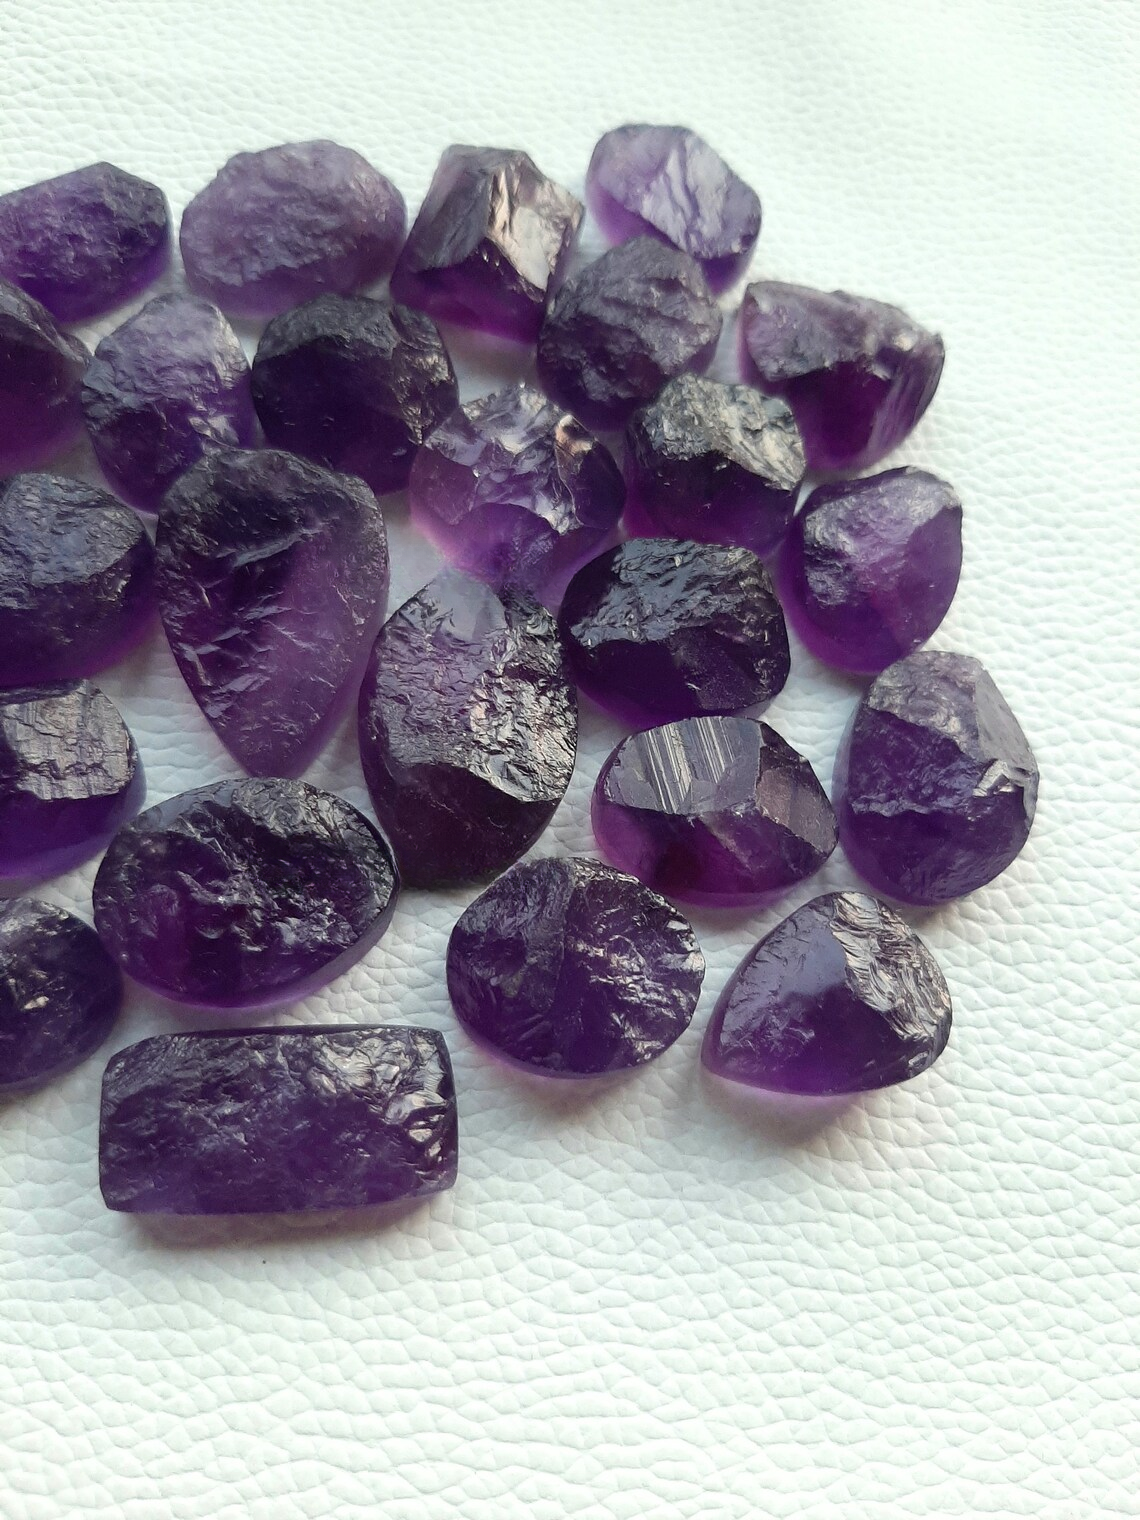 Natural Amethyst Druzy Cabochon, Wholesale Lot Cabochon By Weight With Different Shapes And Sizes Used For Jewelry Making